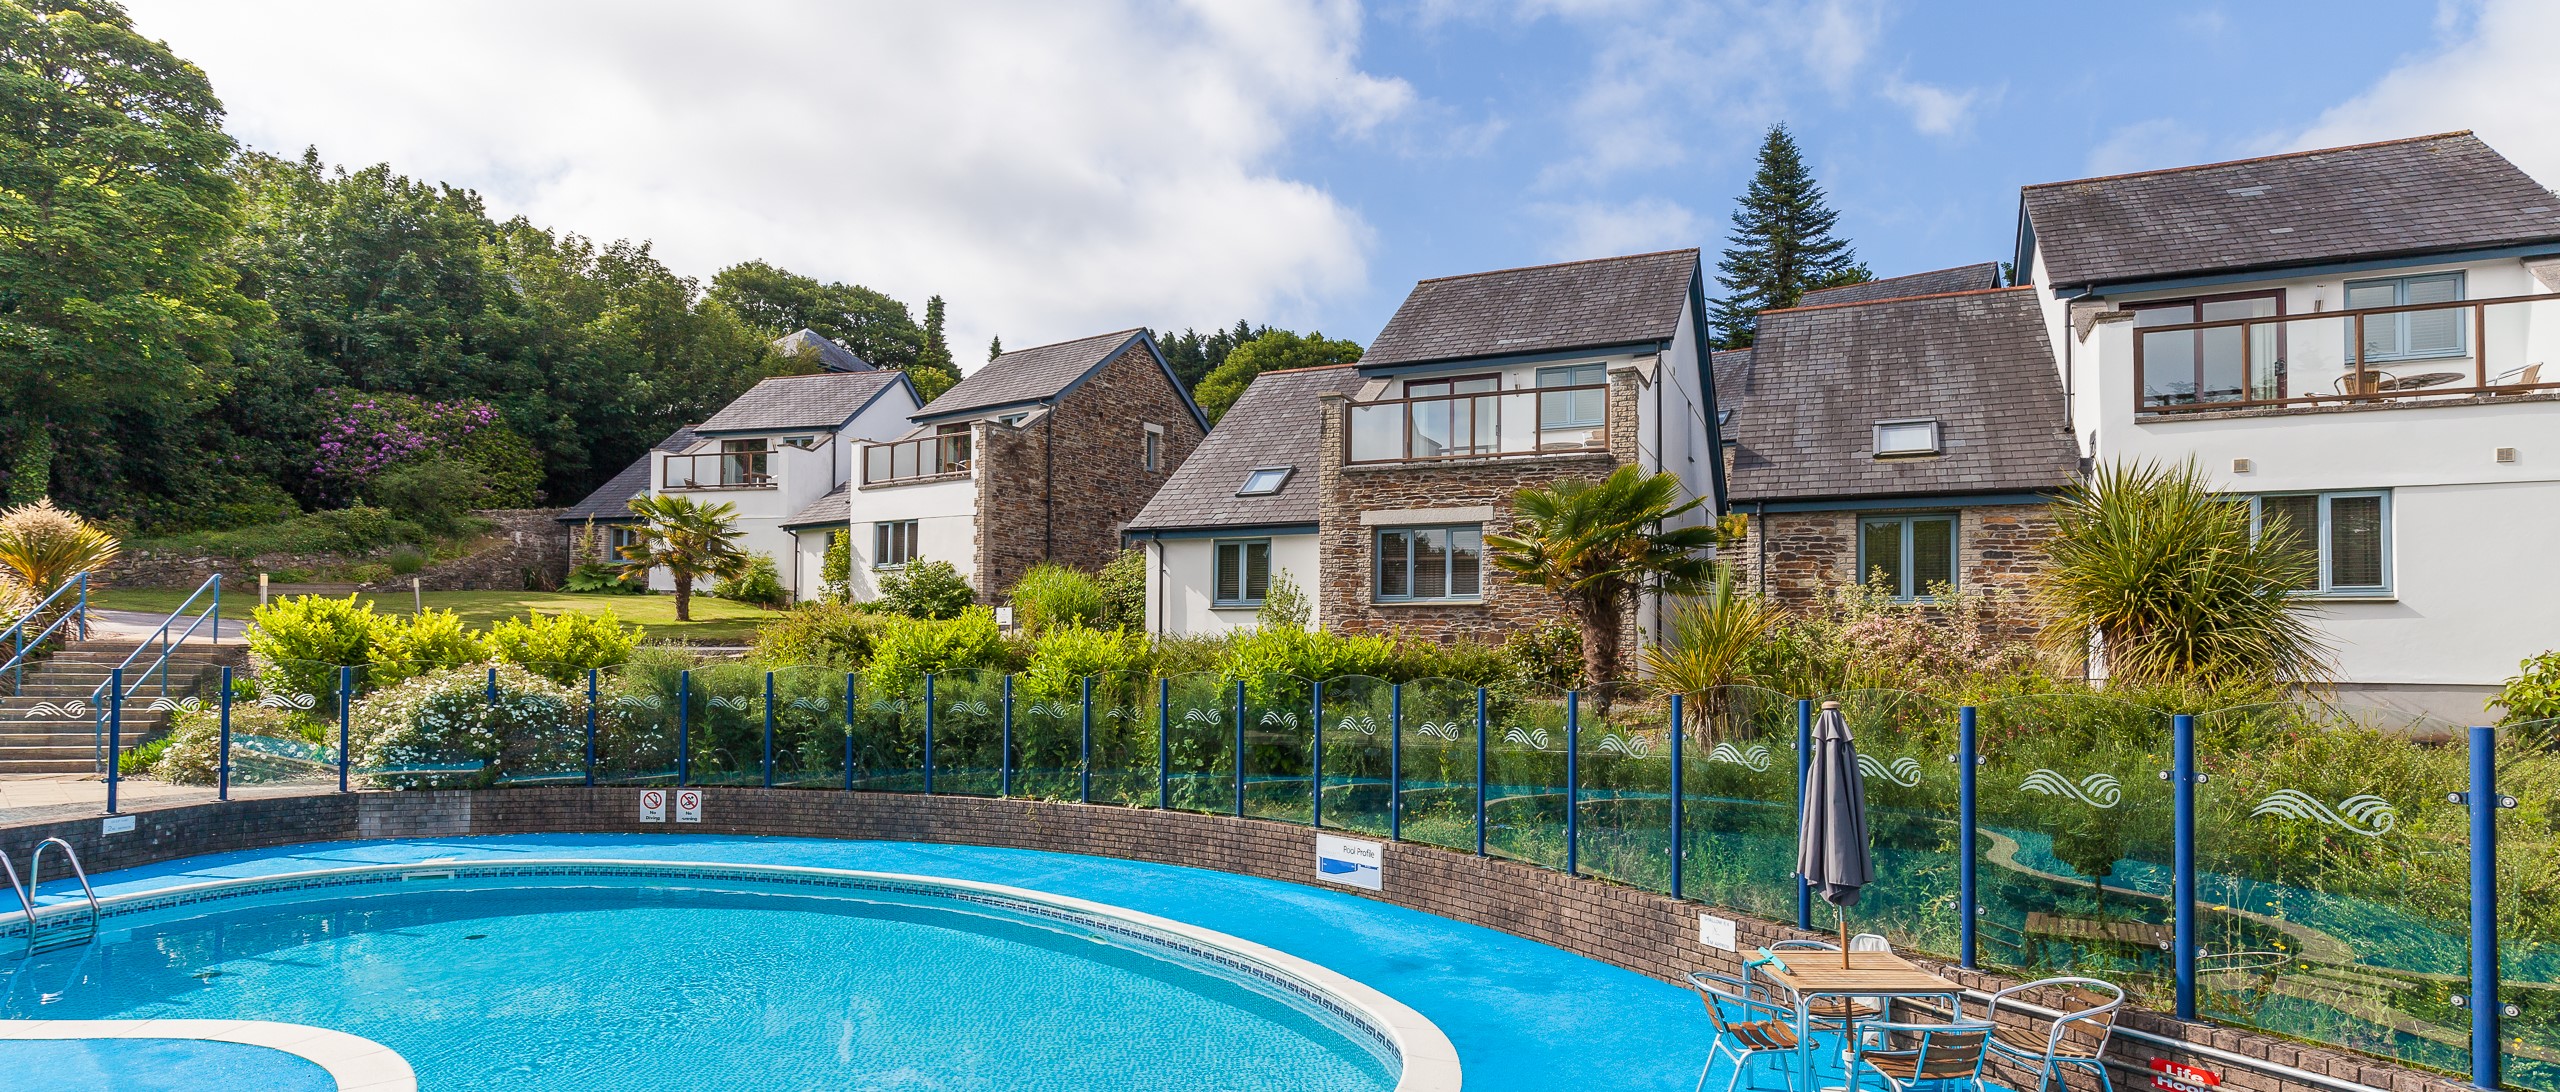 The Valley’s outdoor pool with cottages in Truro, Cornwall